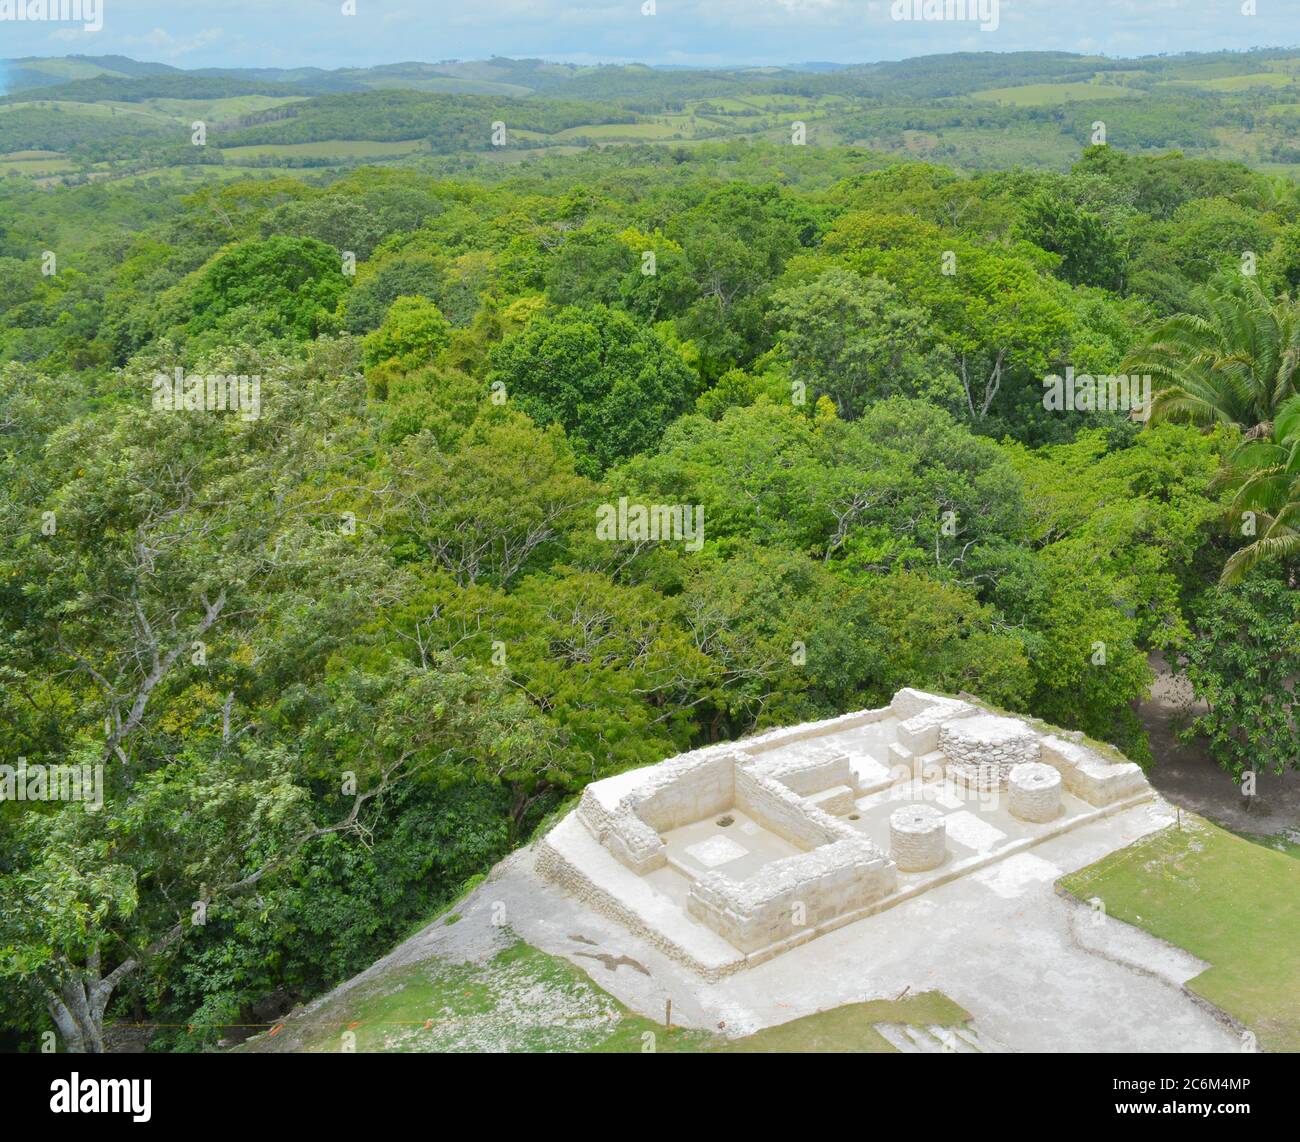 Historic ancient city ruins of Xunantunich Archaeological Reserve in Belize. Stock Photo